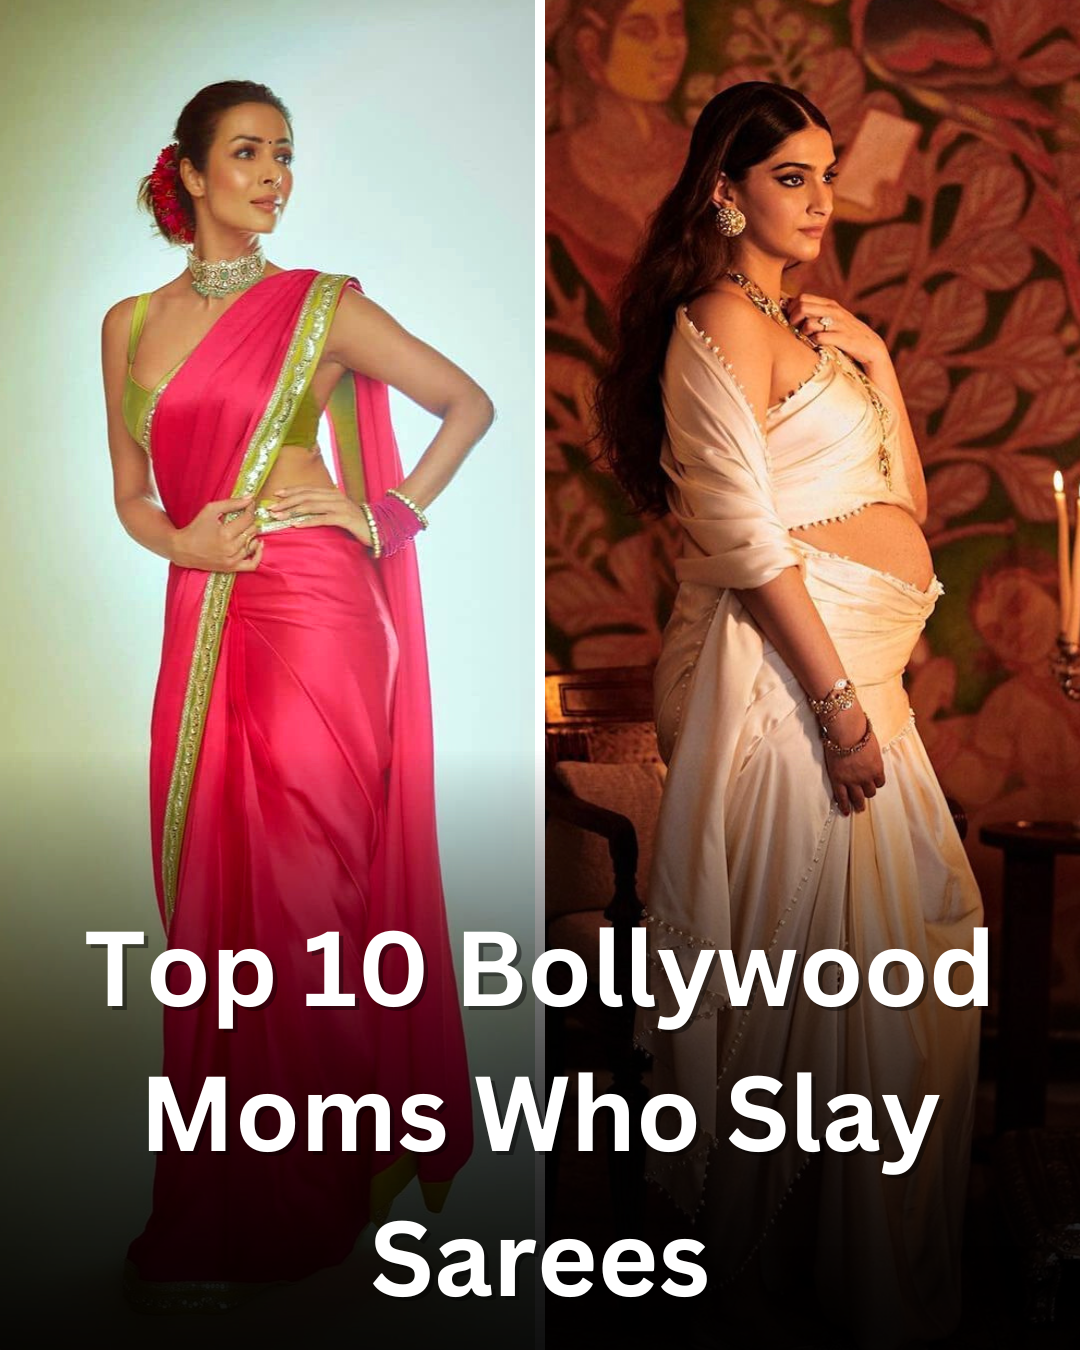 Top 10 Bollywood Moms Who Slay Sarees: Get Inspired by their Hot Styles!